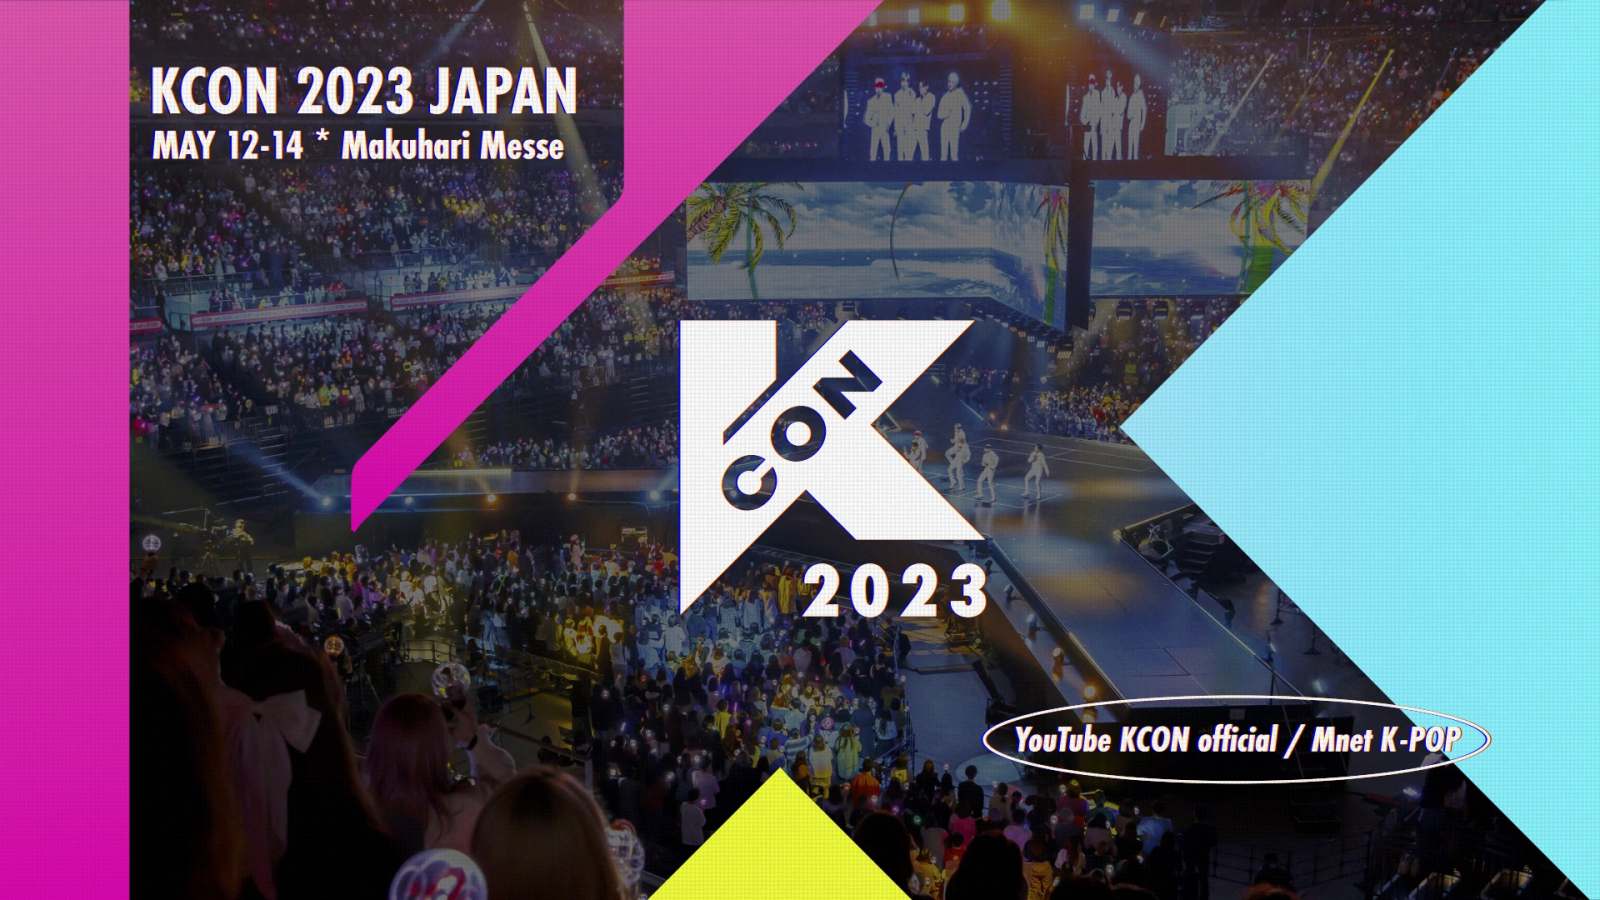 KCON 2023 Japan How to Watch, Date, Venue, Lineup, Ticket Sales, and